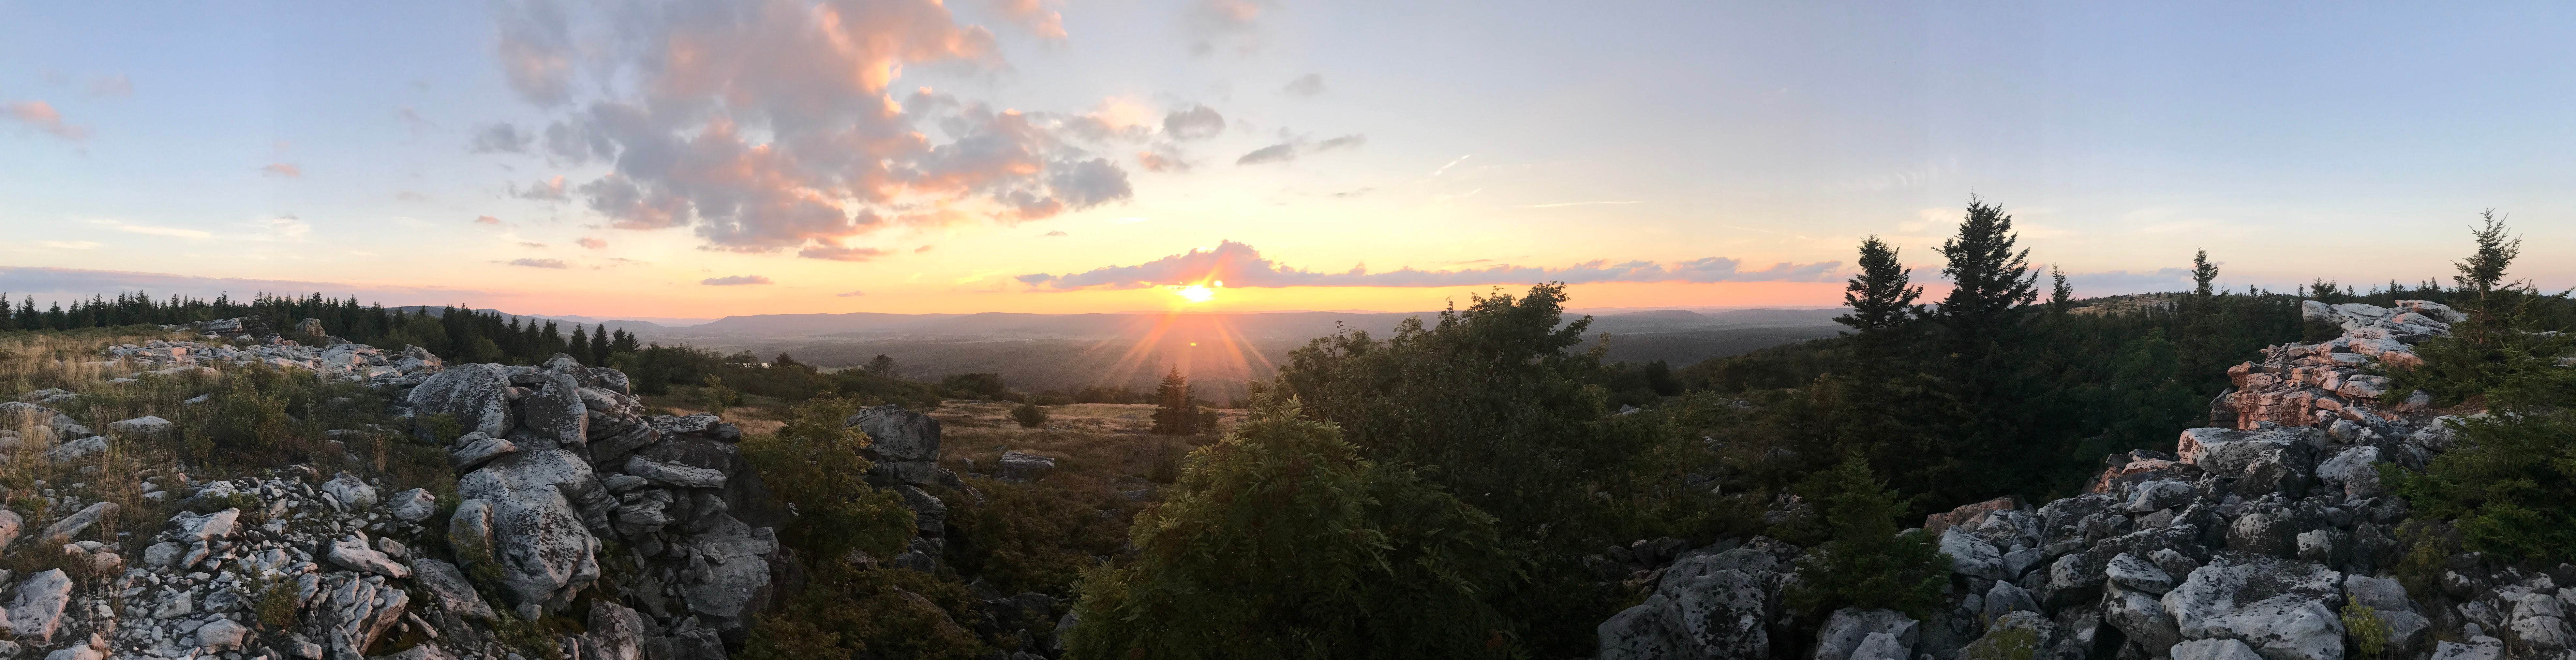 Raven Ridge Sunset...a view of Canaan Valley